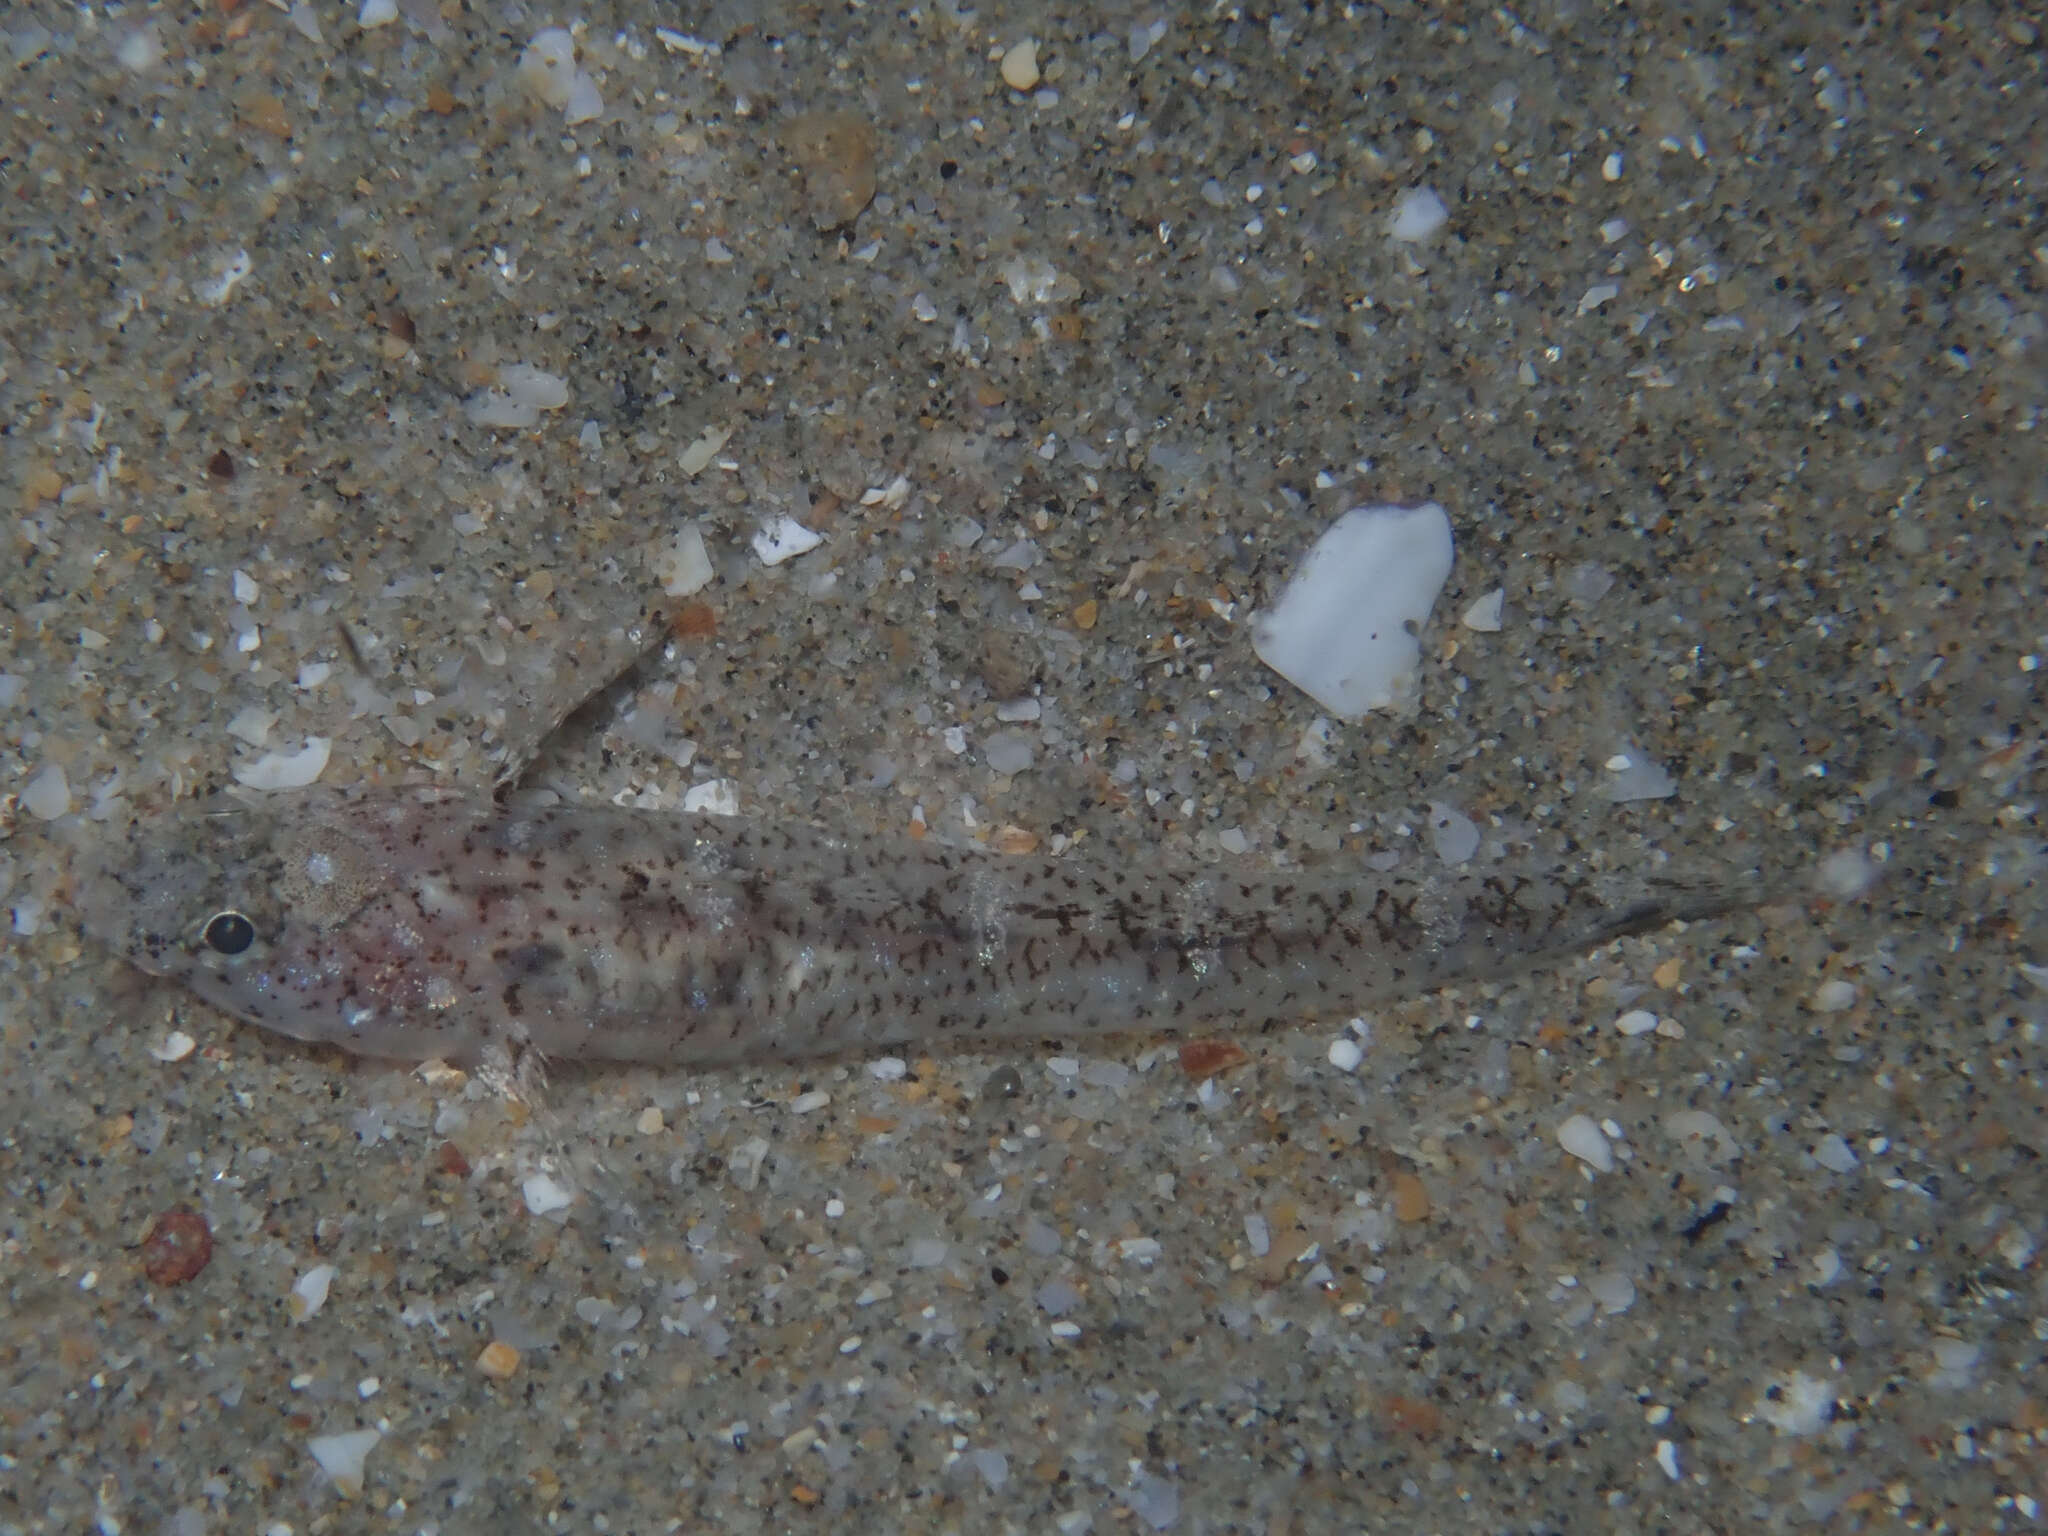 Image of Marbled Goby